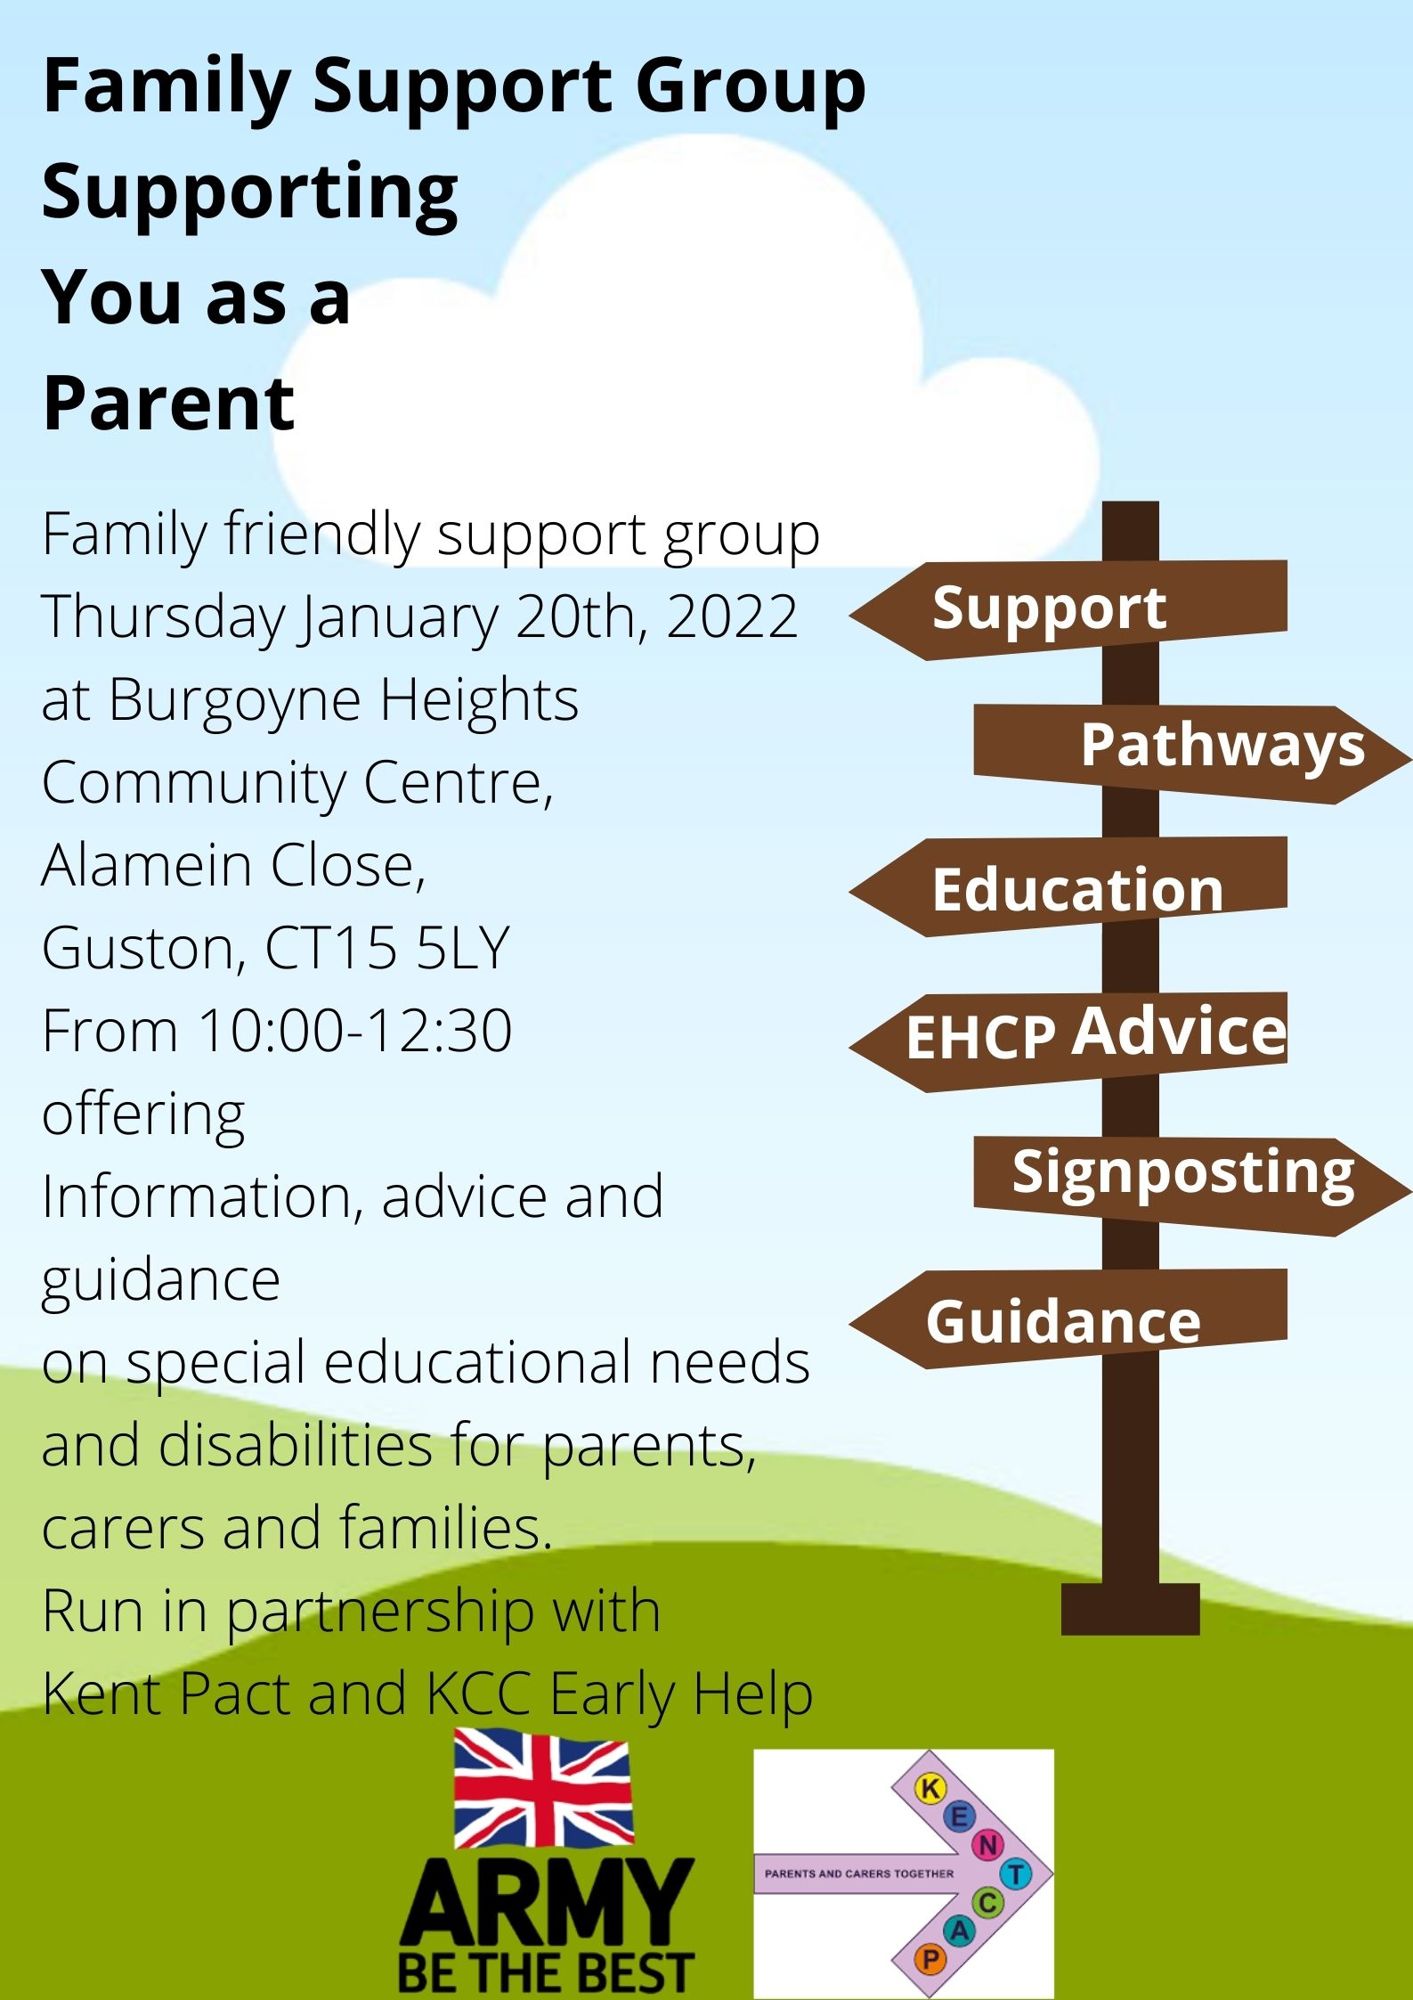 Dover family support group